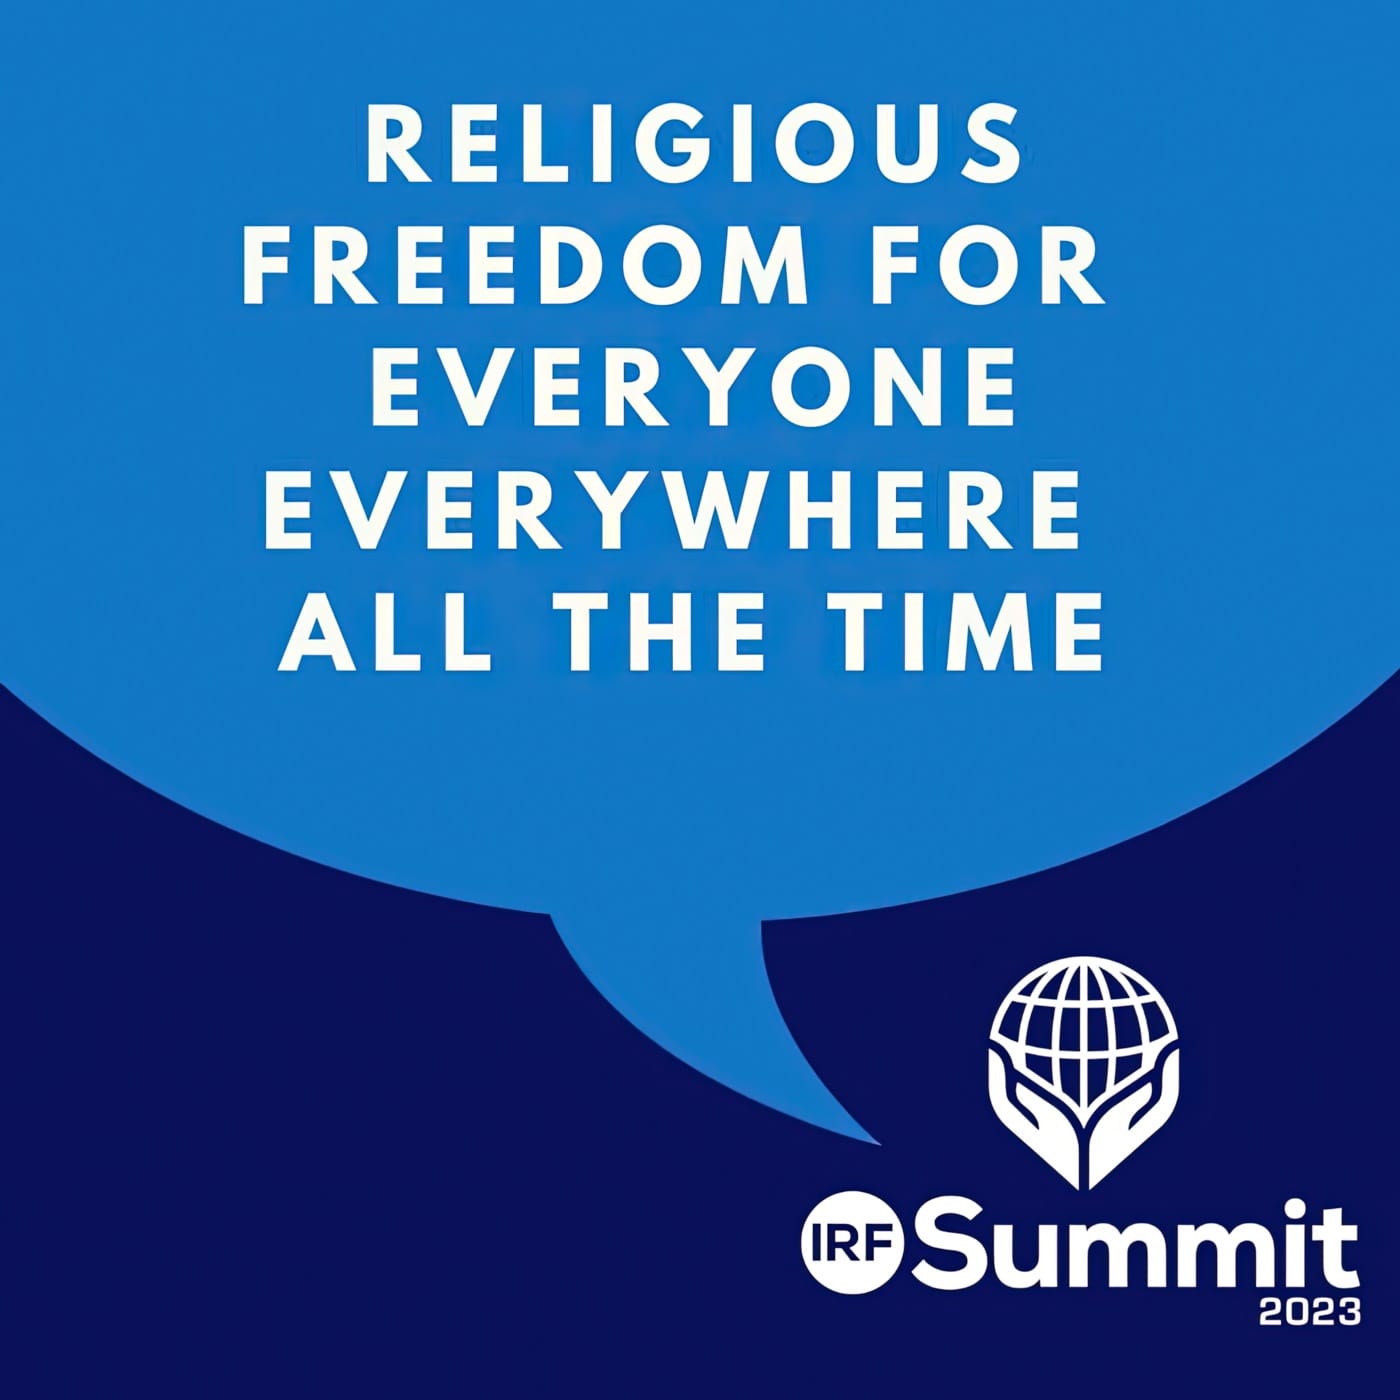 The International Religious Freedom (IRF) Summit, the world’s premier annual gathering of religious freedom advocates and activists.